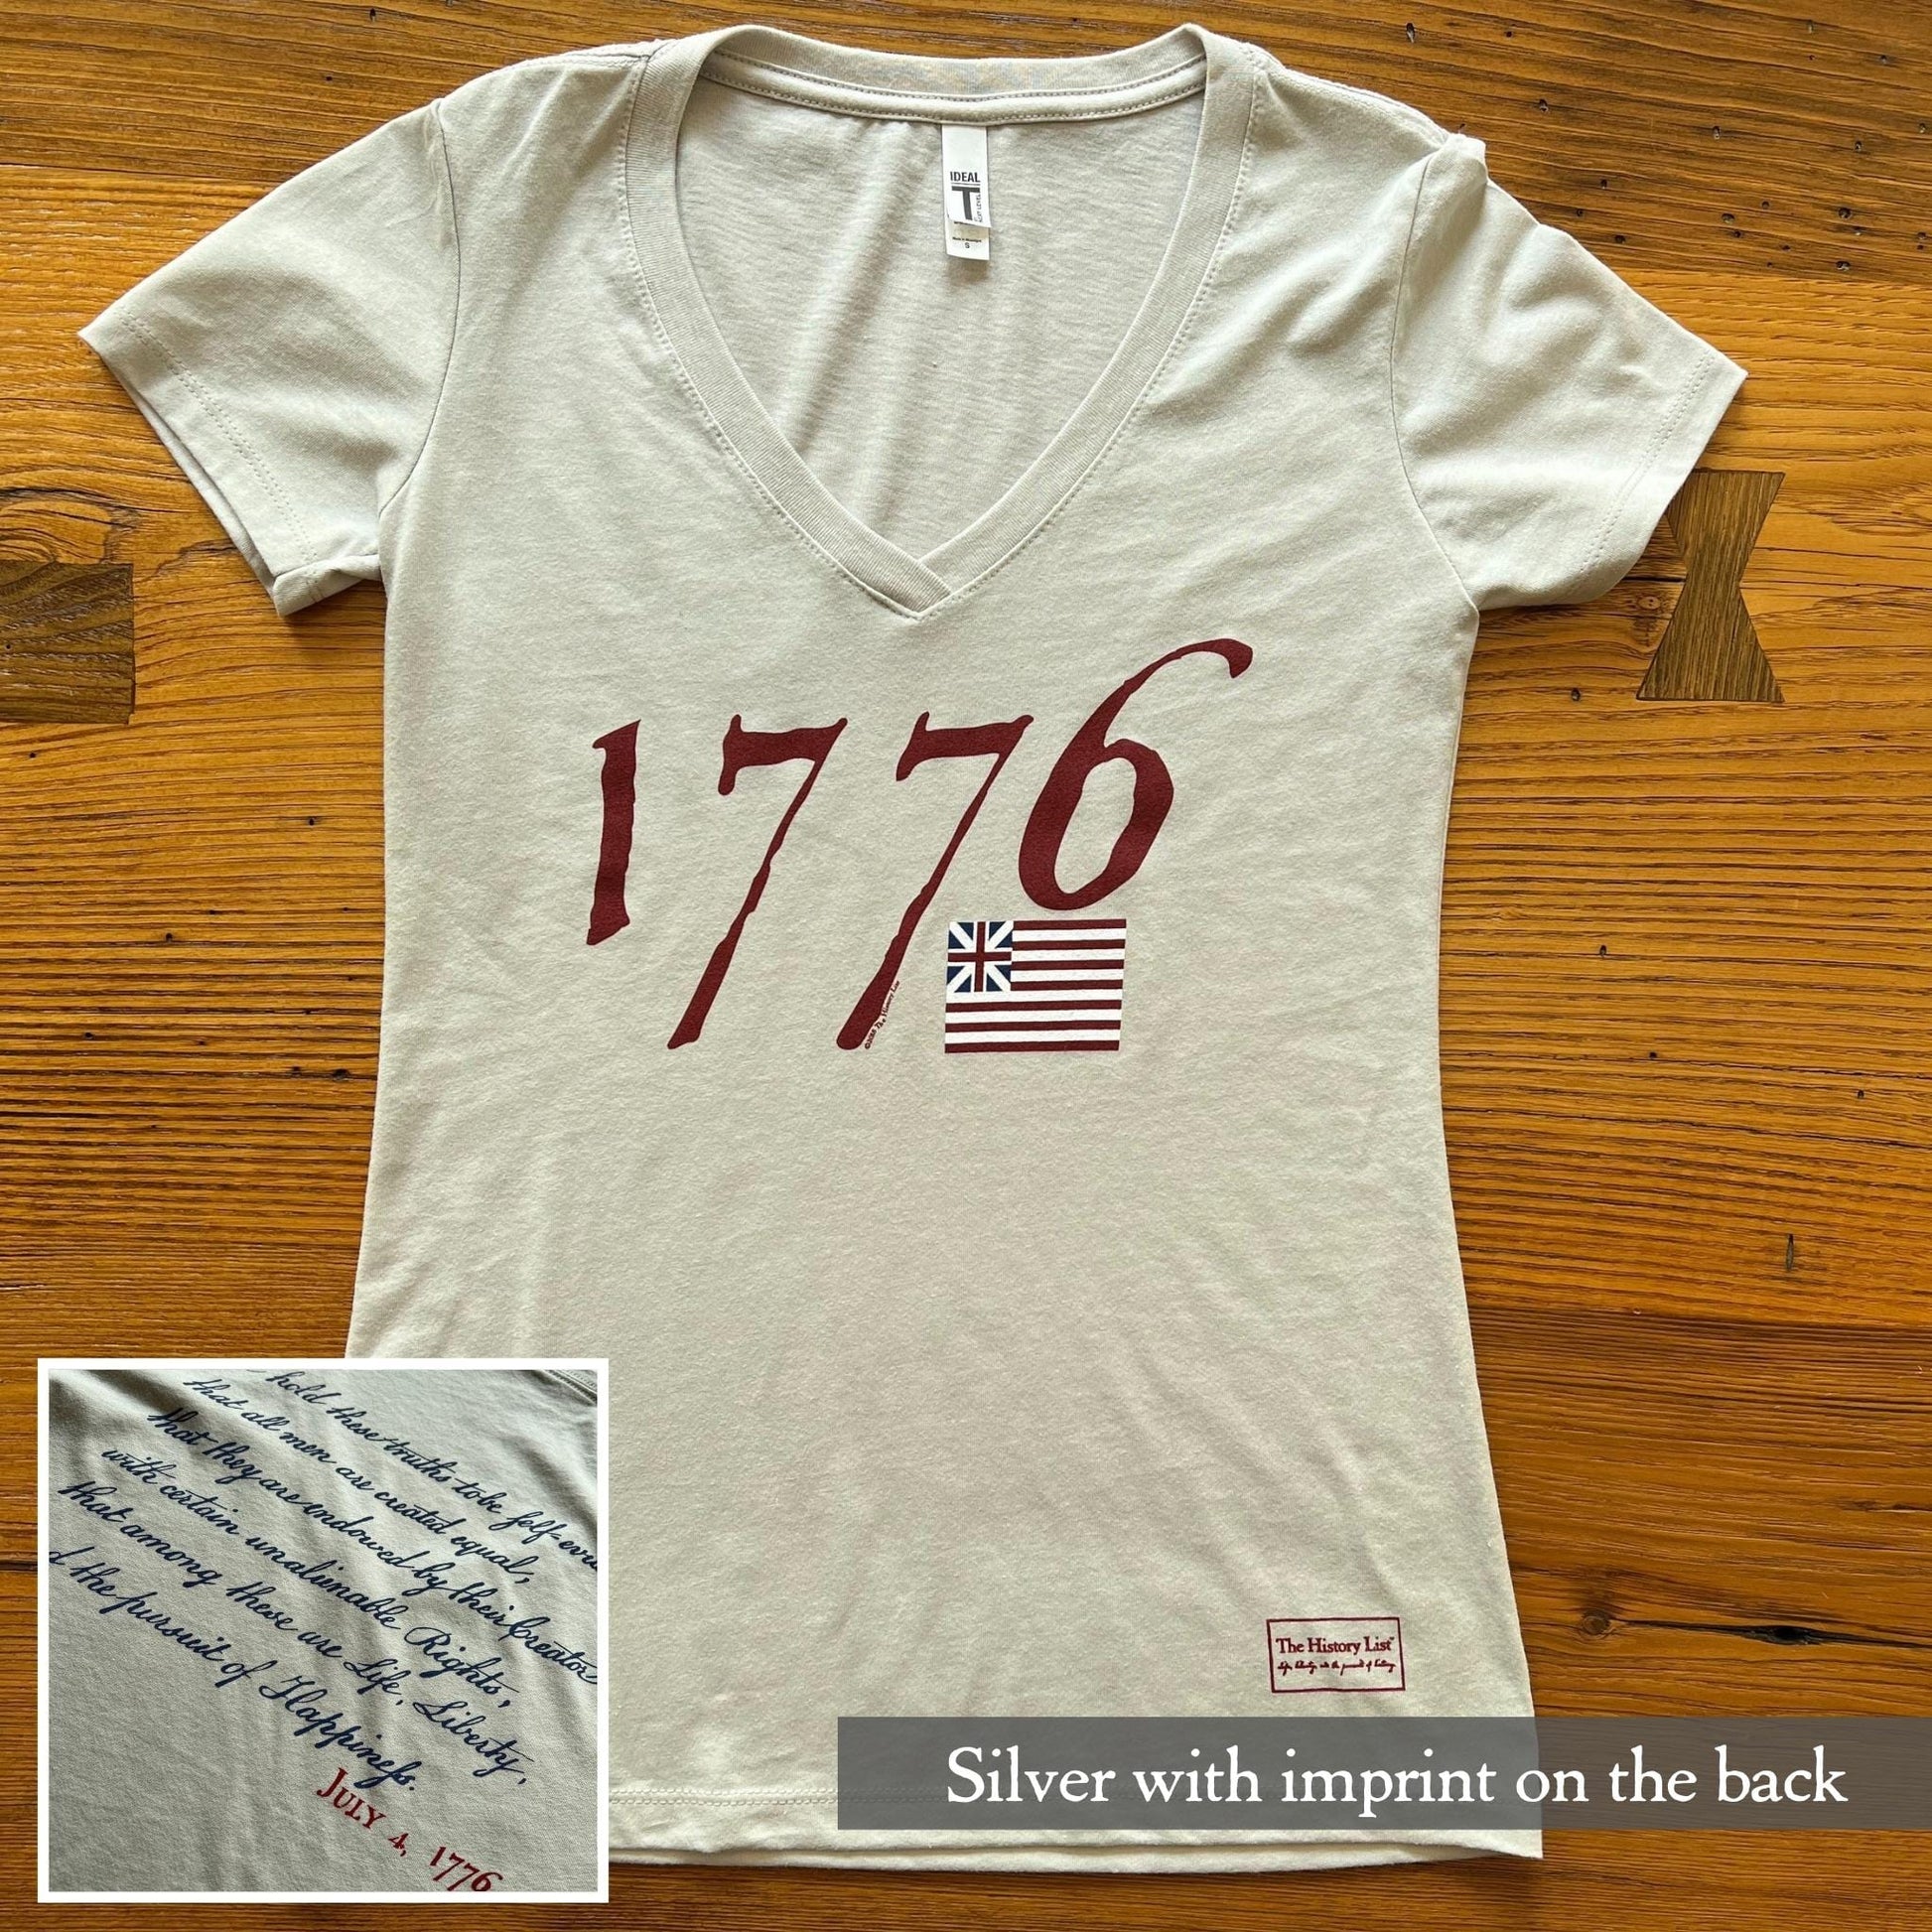 "We hold these truths - July 4, 1776” v-neck shirt from The History List store in Silver with back imprint